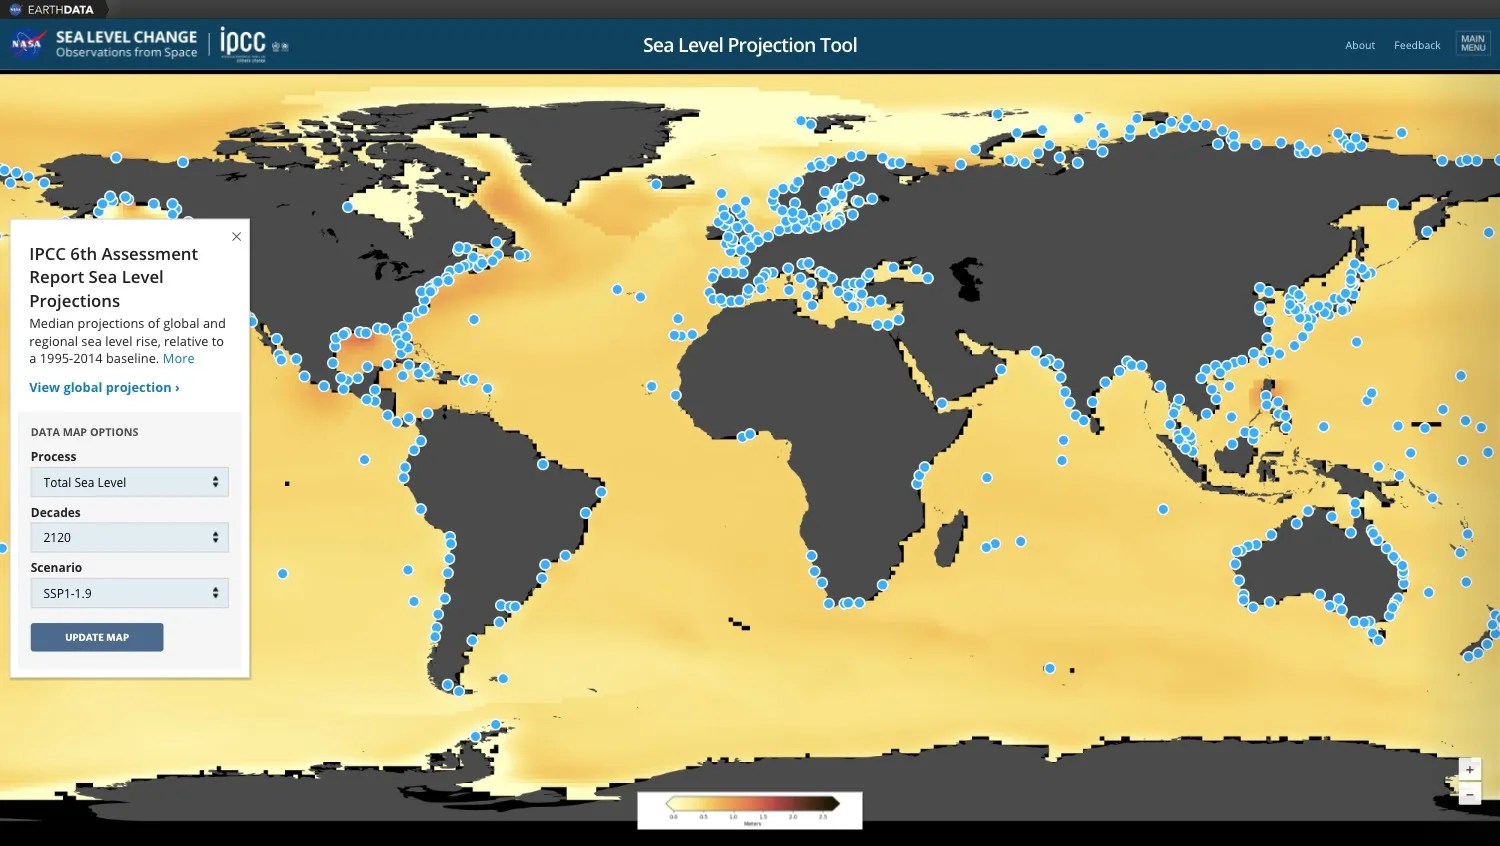 Screenshot of application displaying a map of the world with the ocean colorized in yellow,